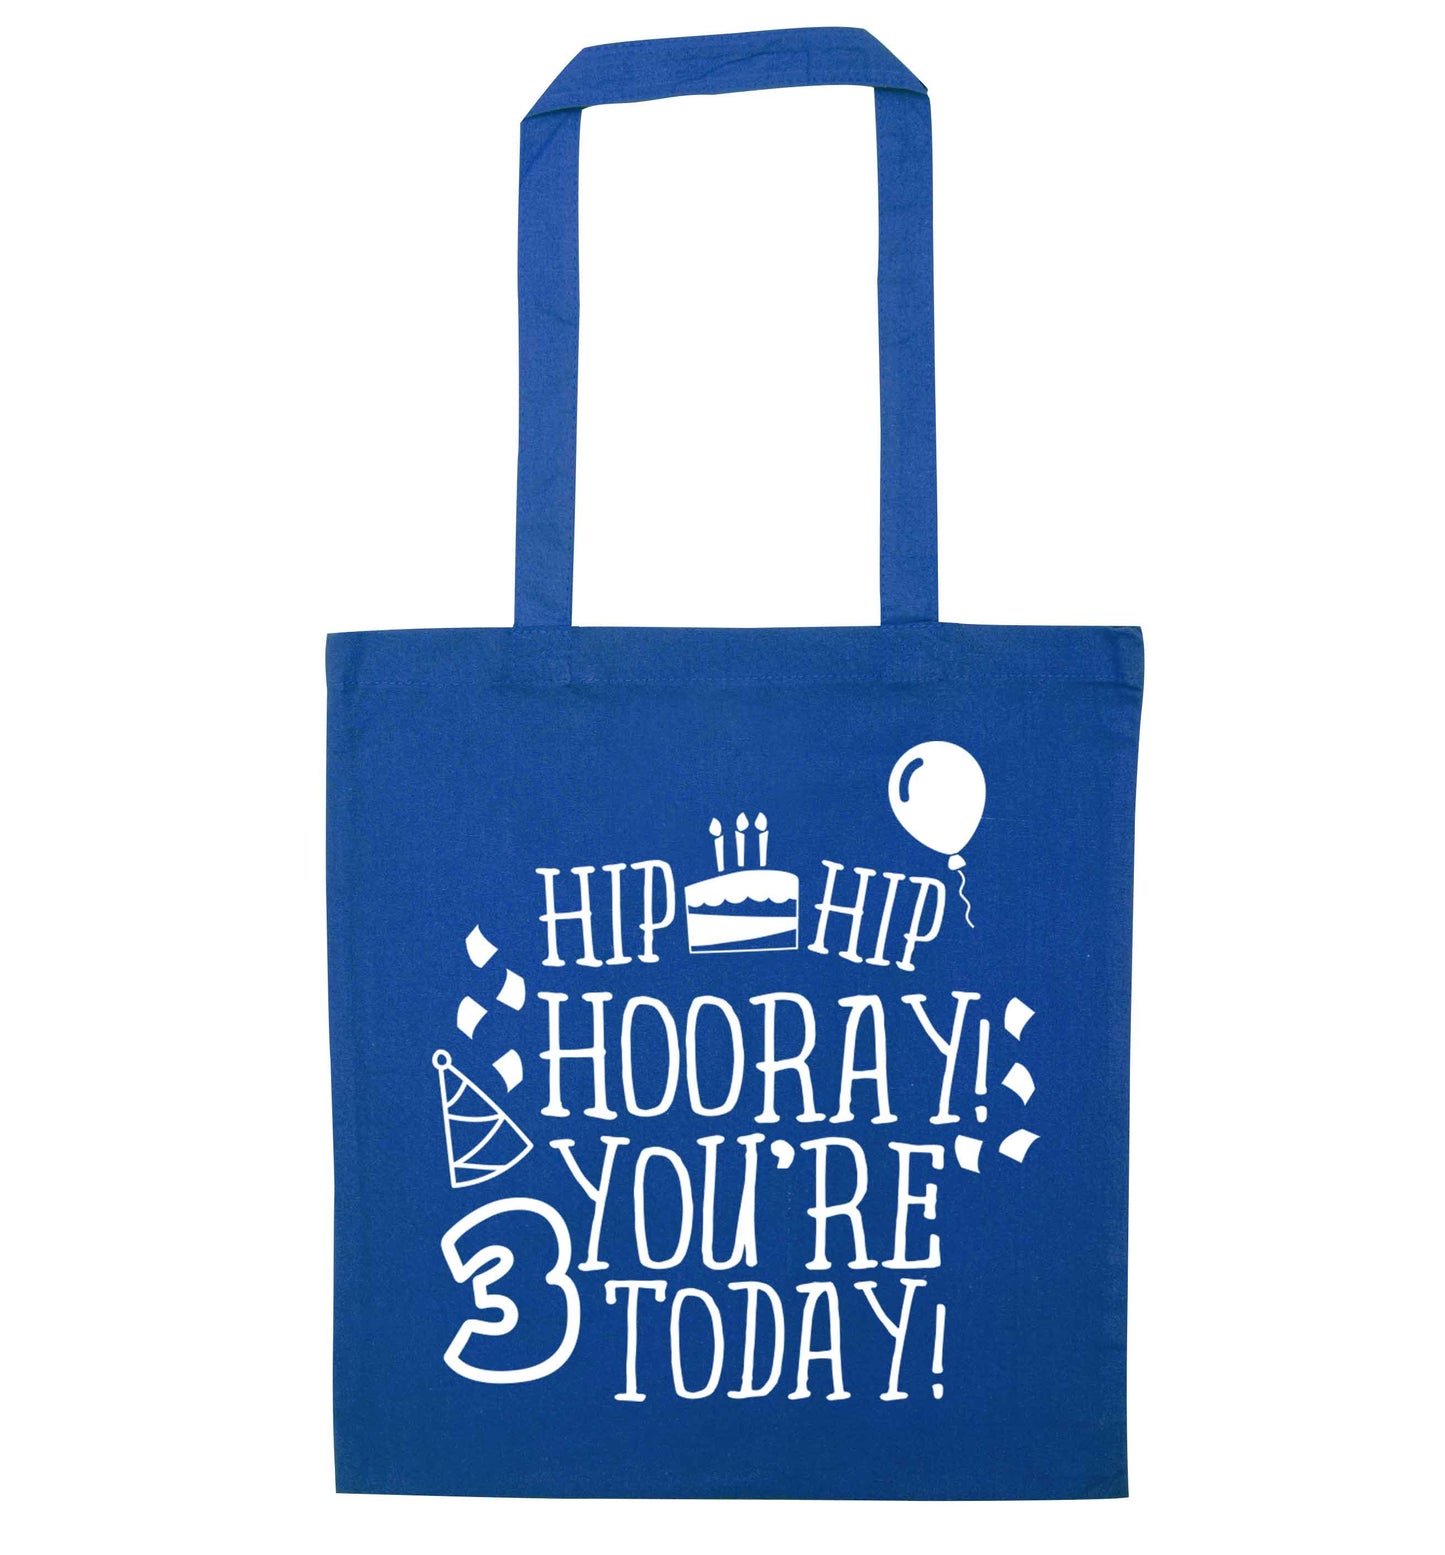 You're 3 Todayblue tote bag